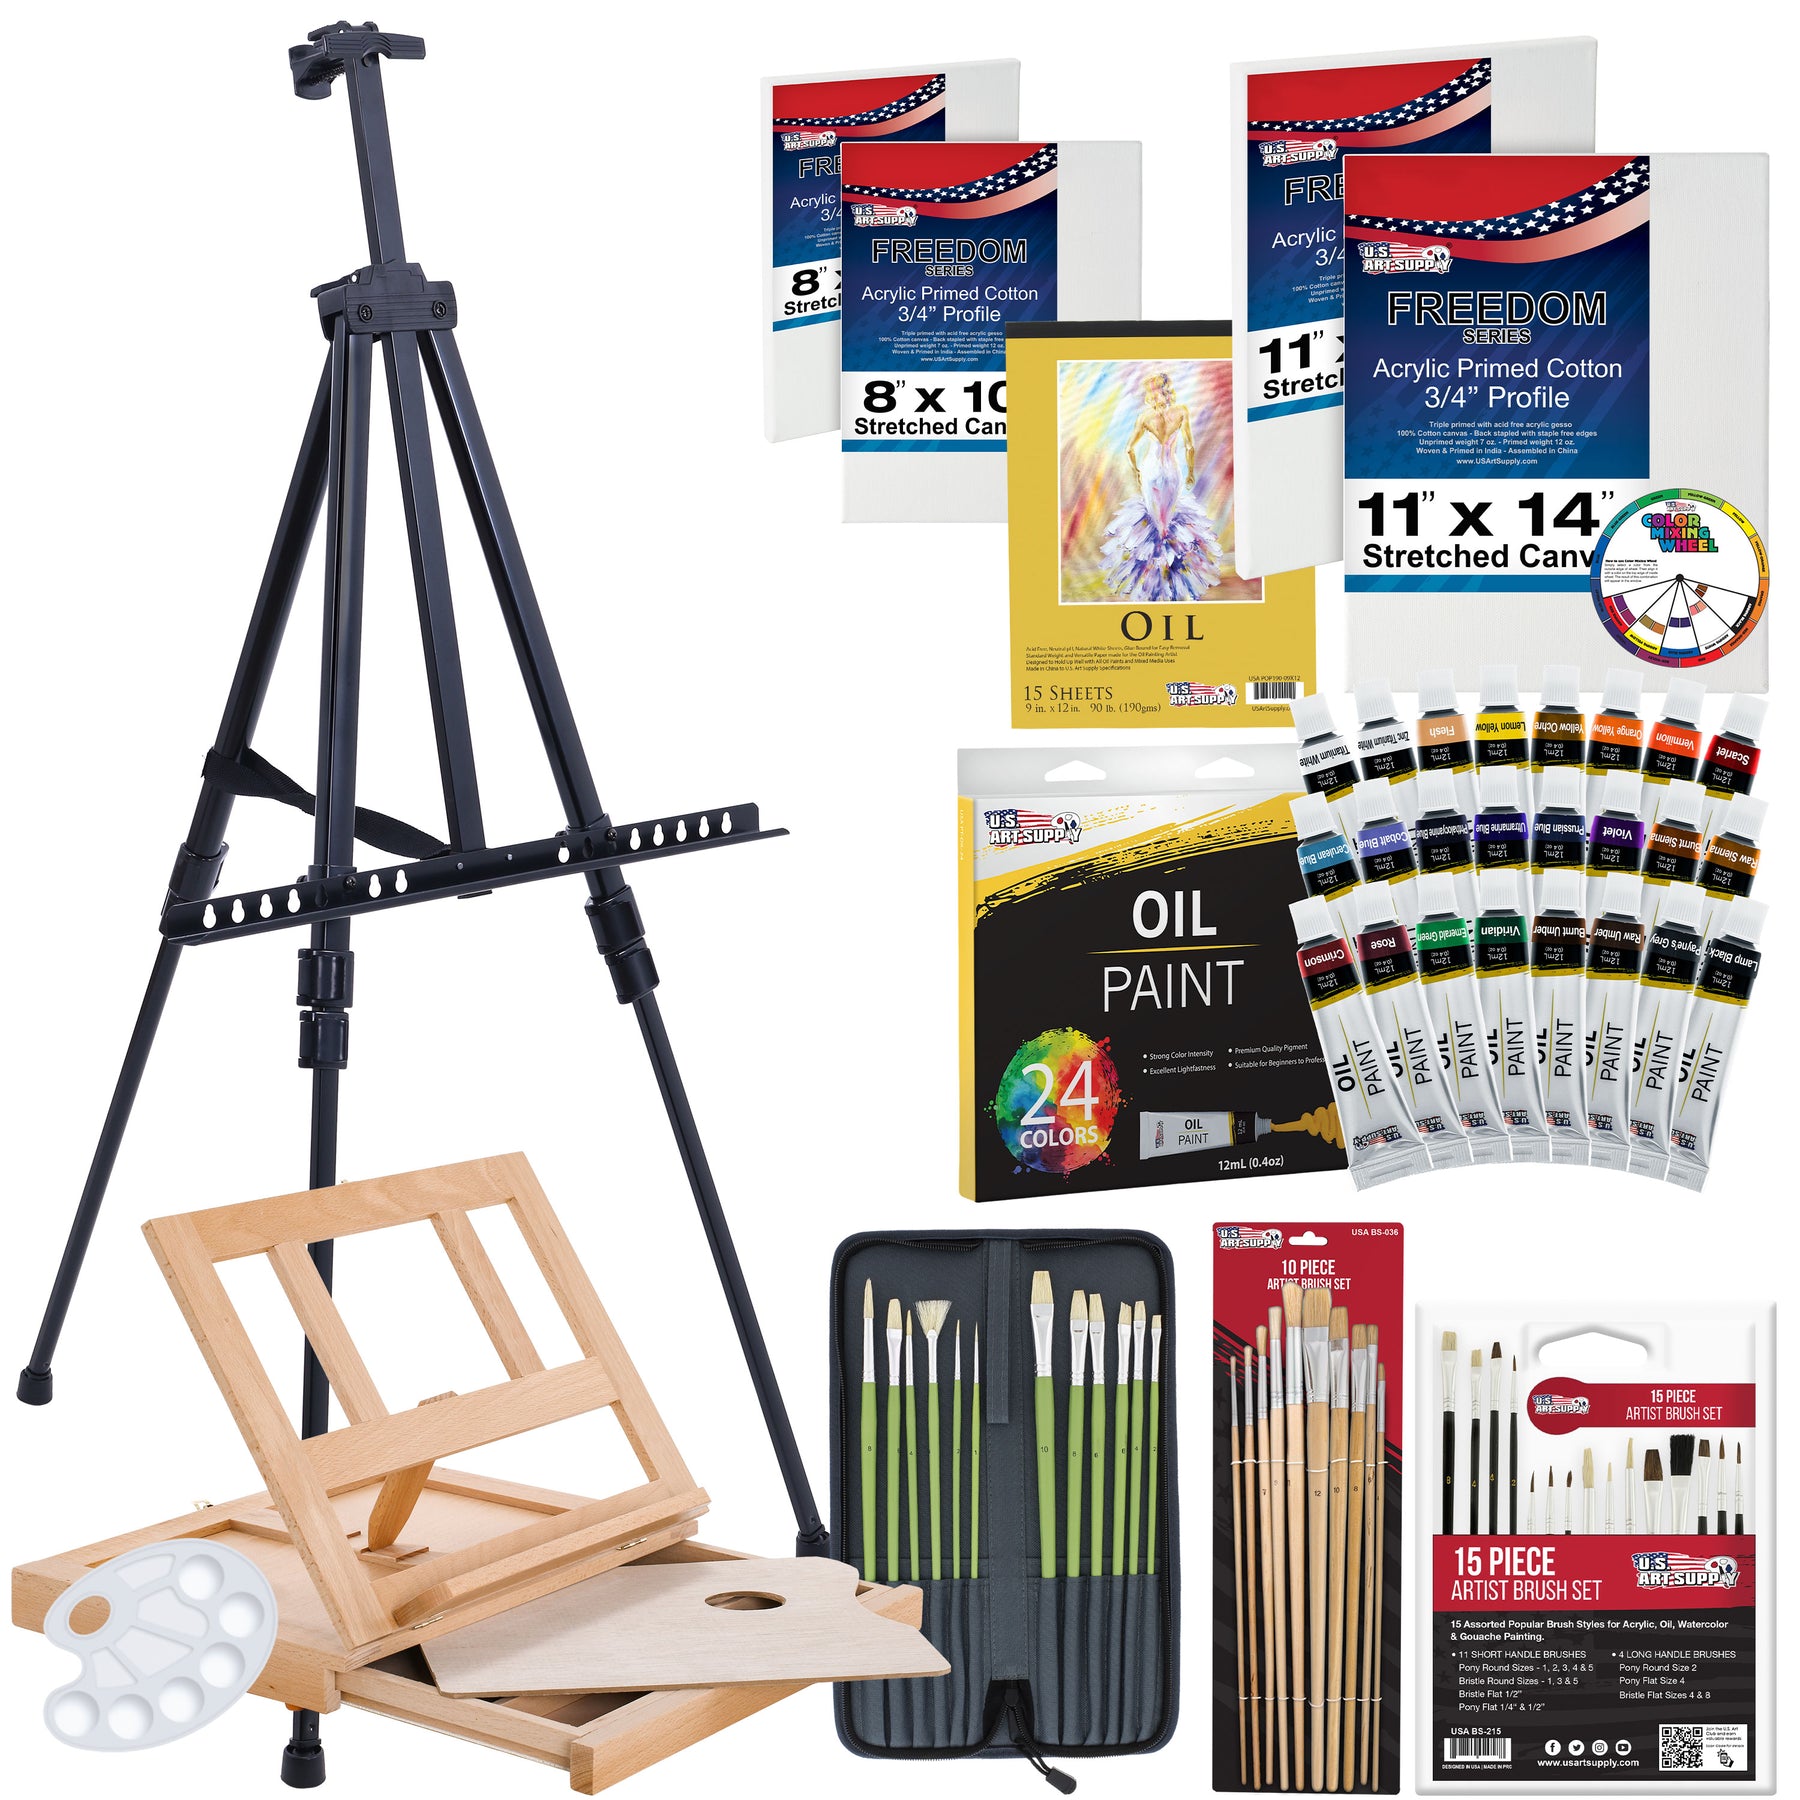 US Art Supply 13-Piece Artist Painting Set with 6 Vivid Oil Paint Colors,  12 Easel, 2 Canvas Panels, 3 Brushes, Wood Painting Palette - Fun Children